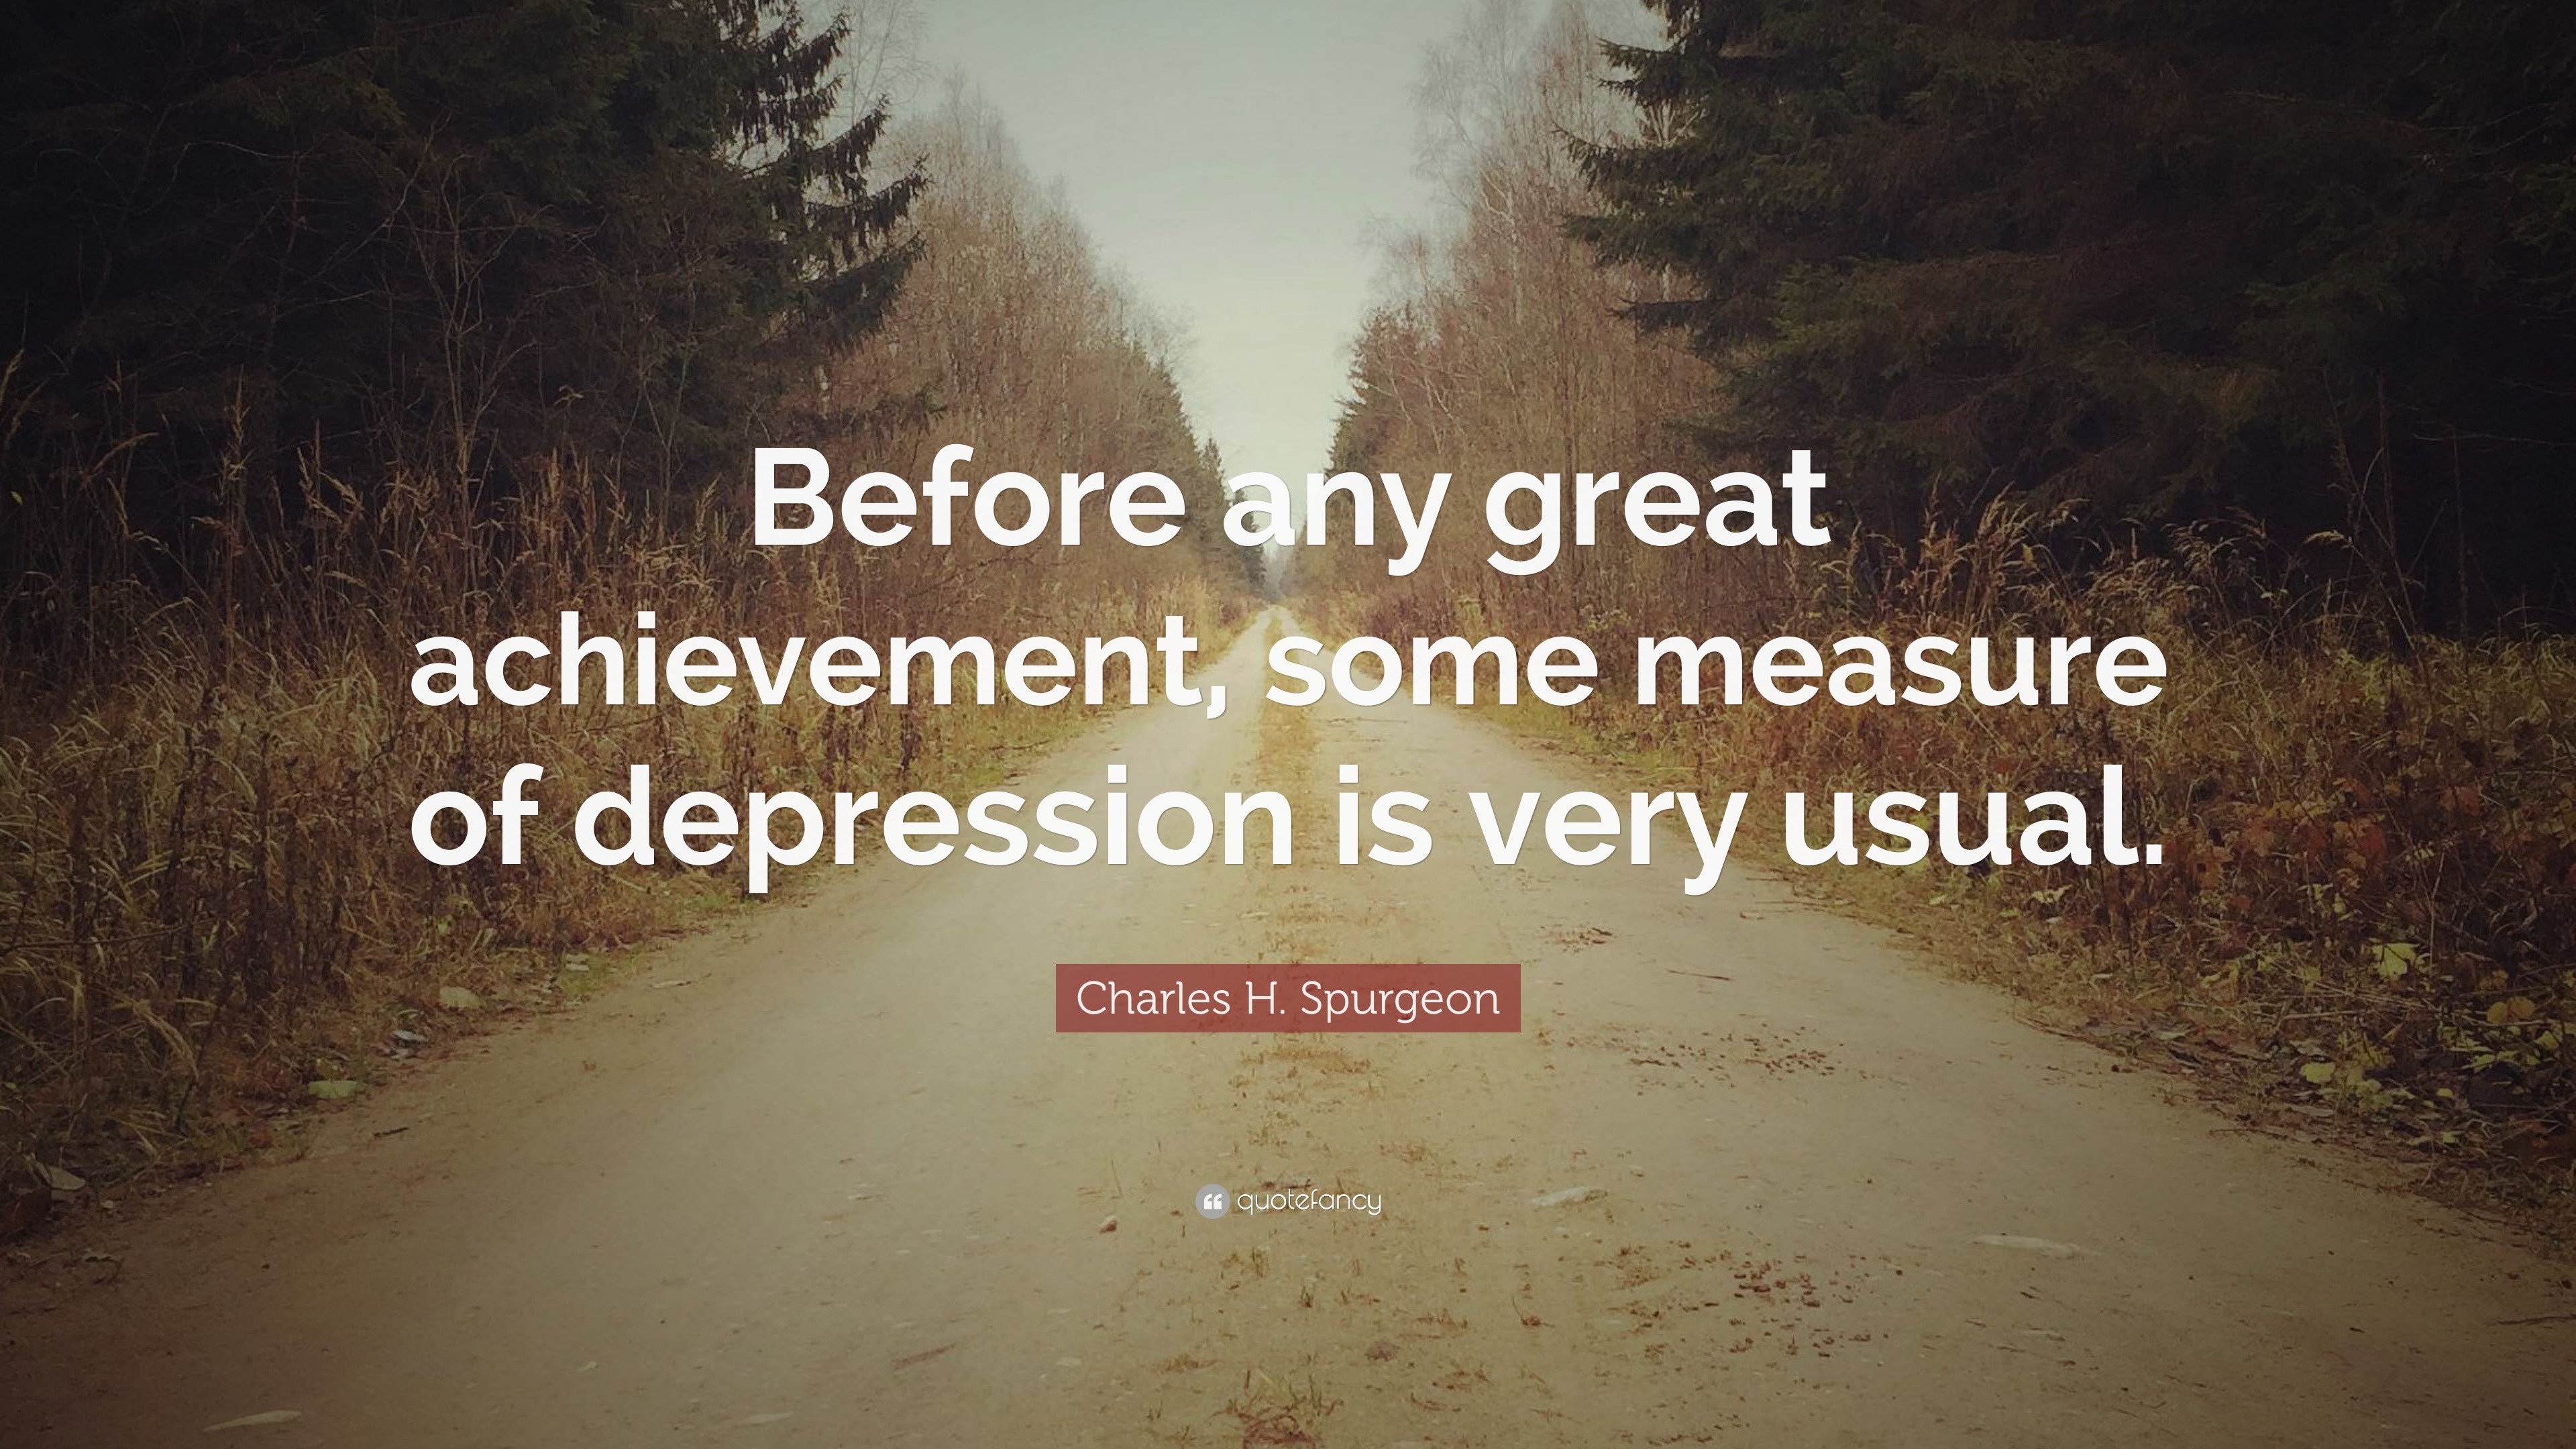 Charles H. Spurgeon Quote: “Before any great achievement, some measure